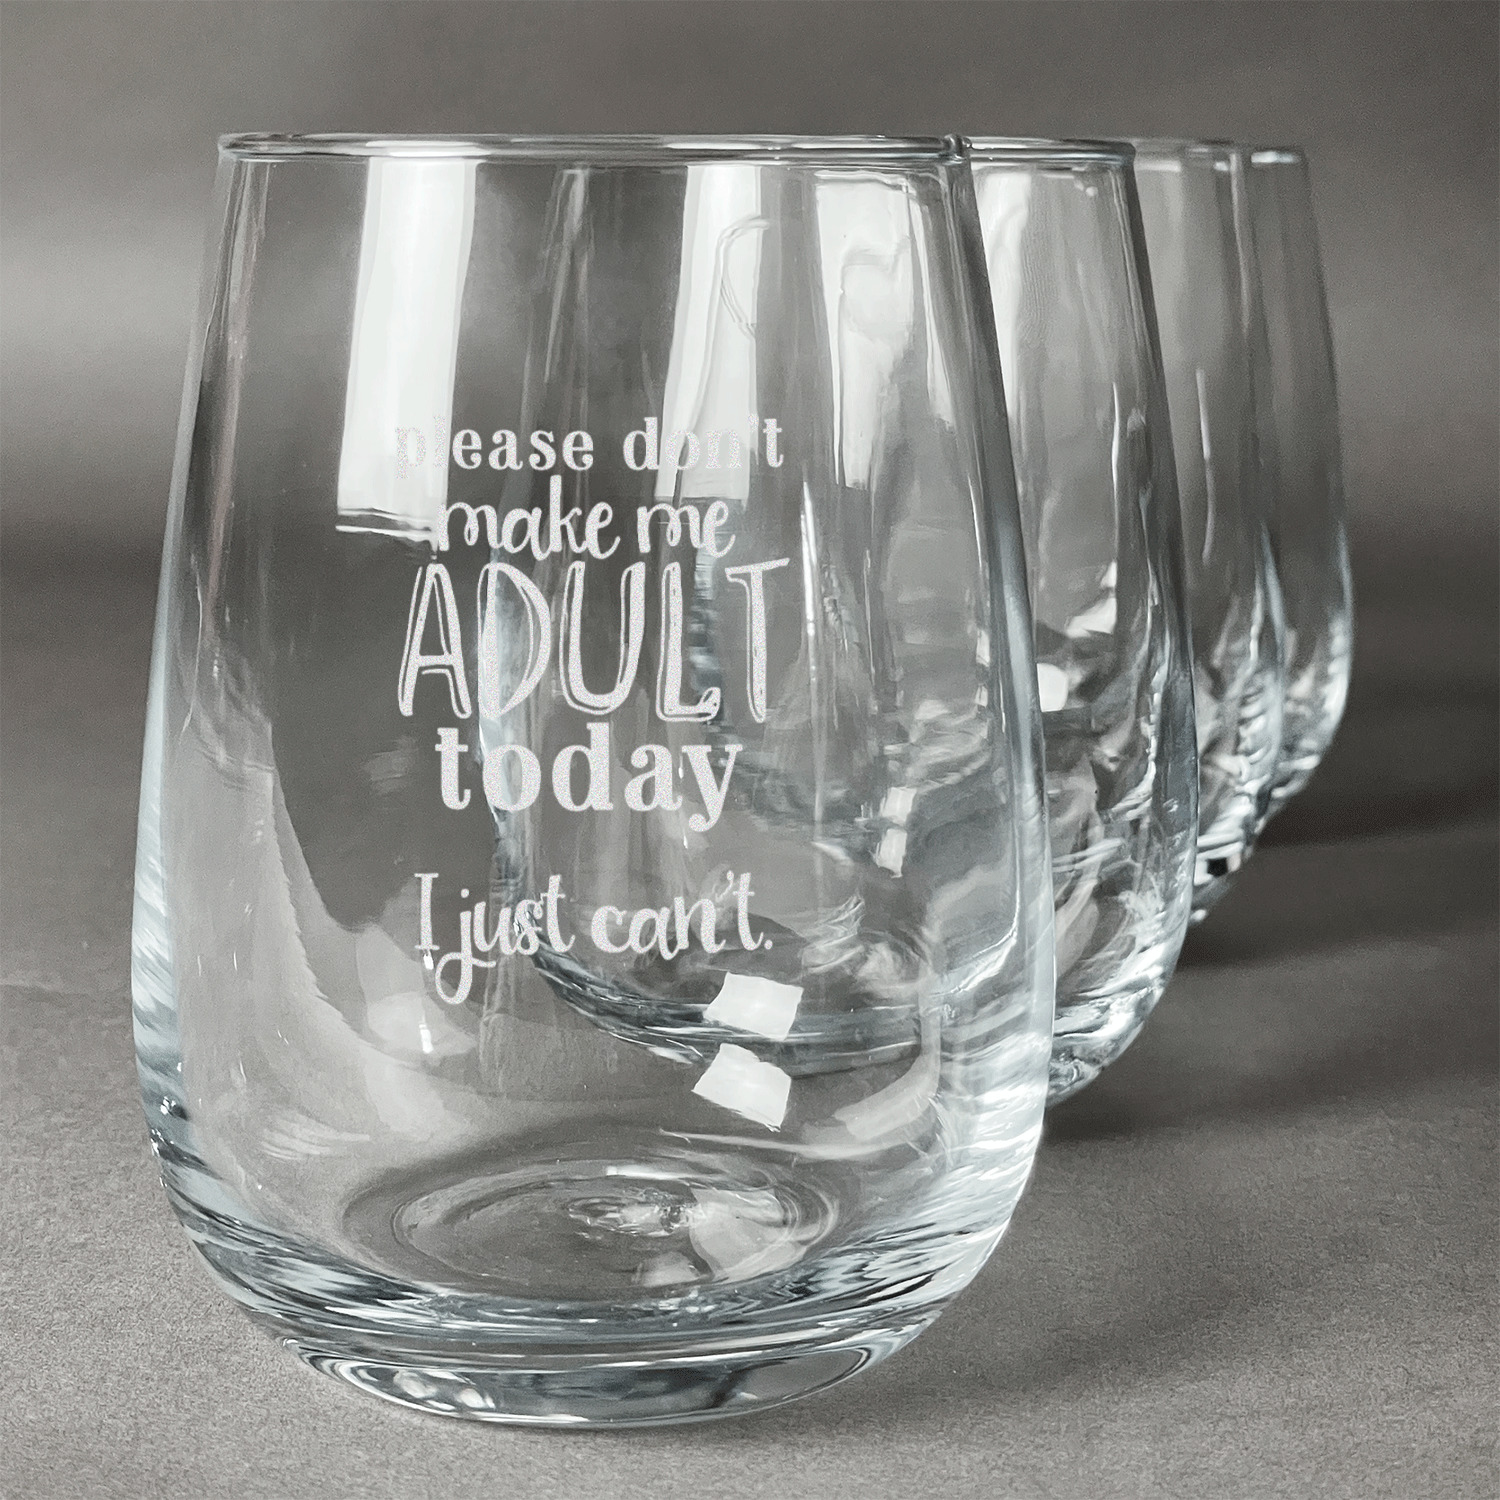 Funny Quotes And Sayings Stemless Wine Glasses Set Of 4 Personalized